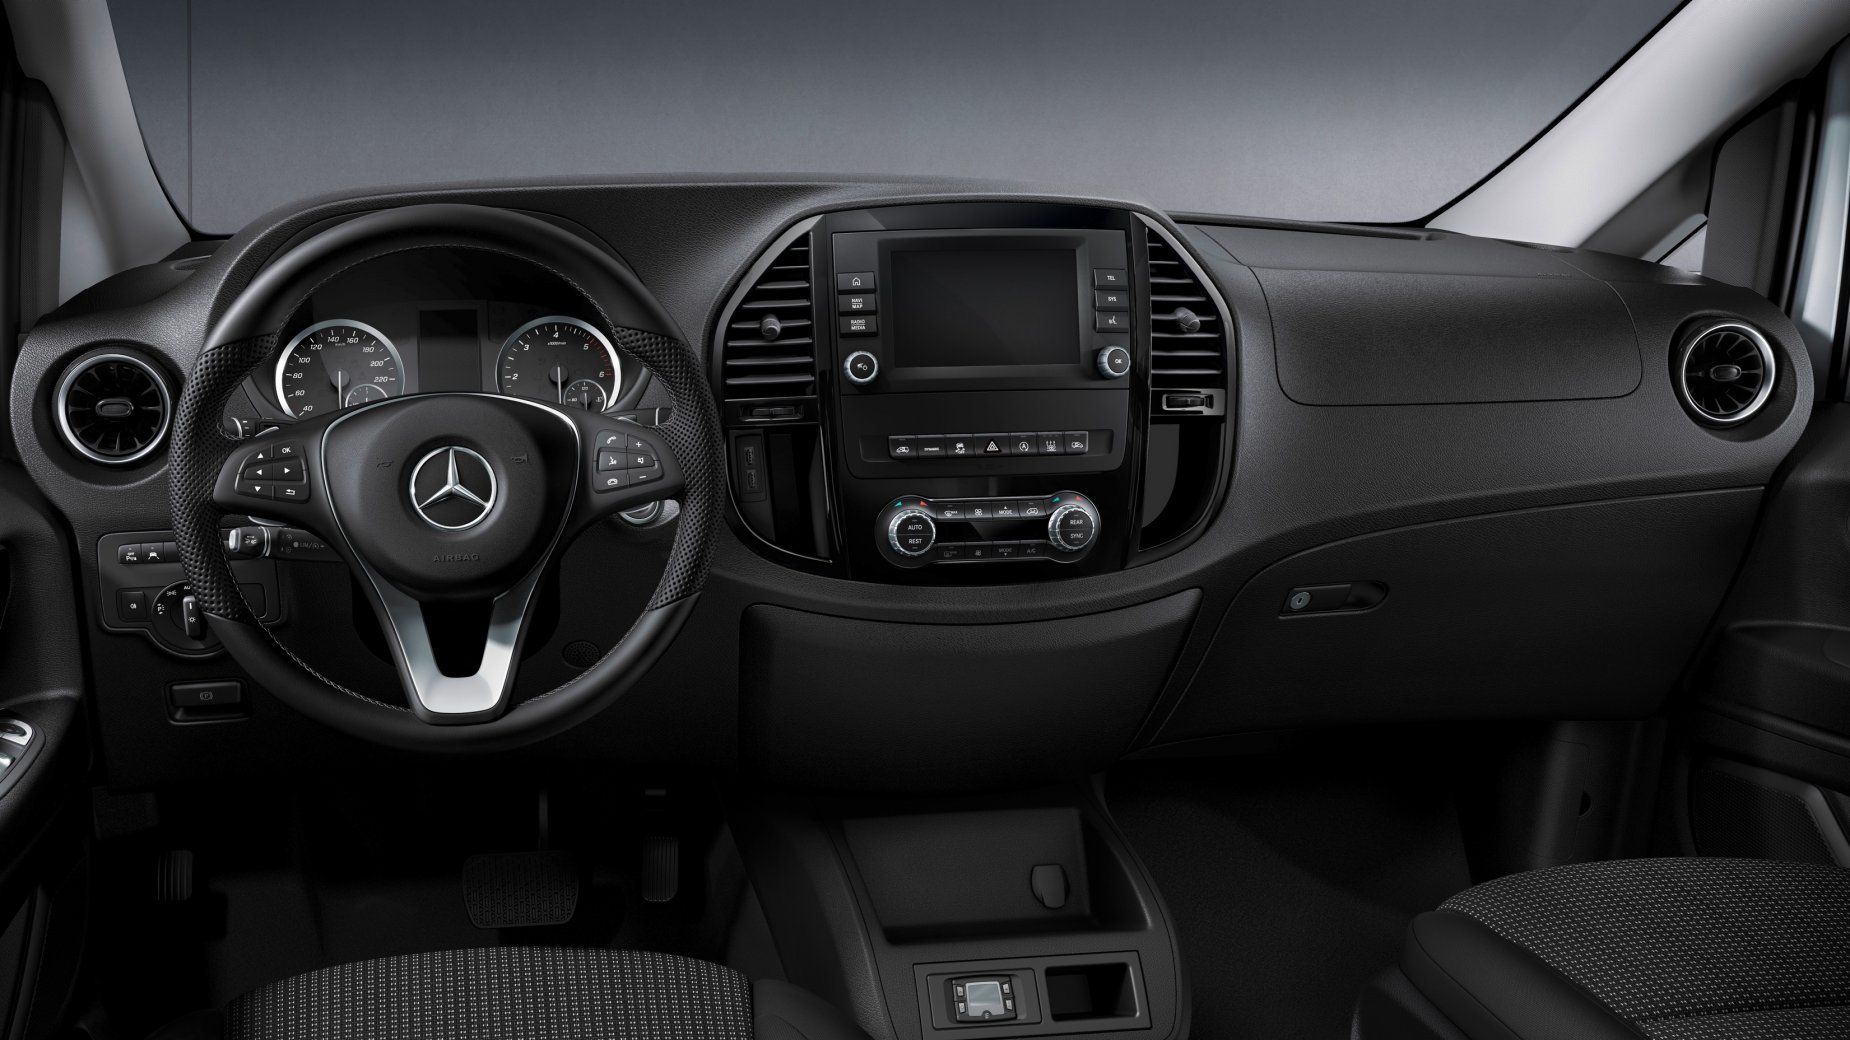 Mercedes Vito Review, For Sale, Colours, Interior, Models & Specs